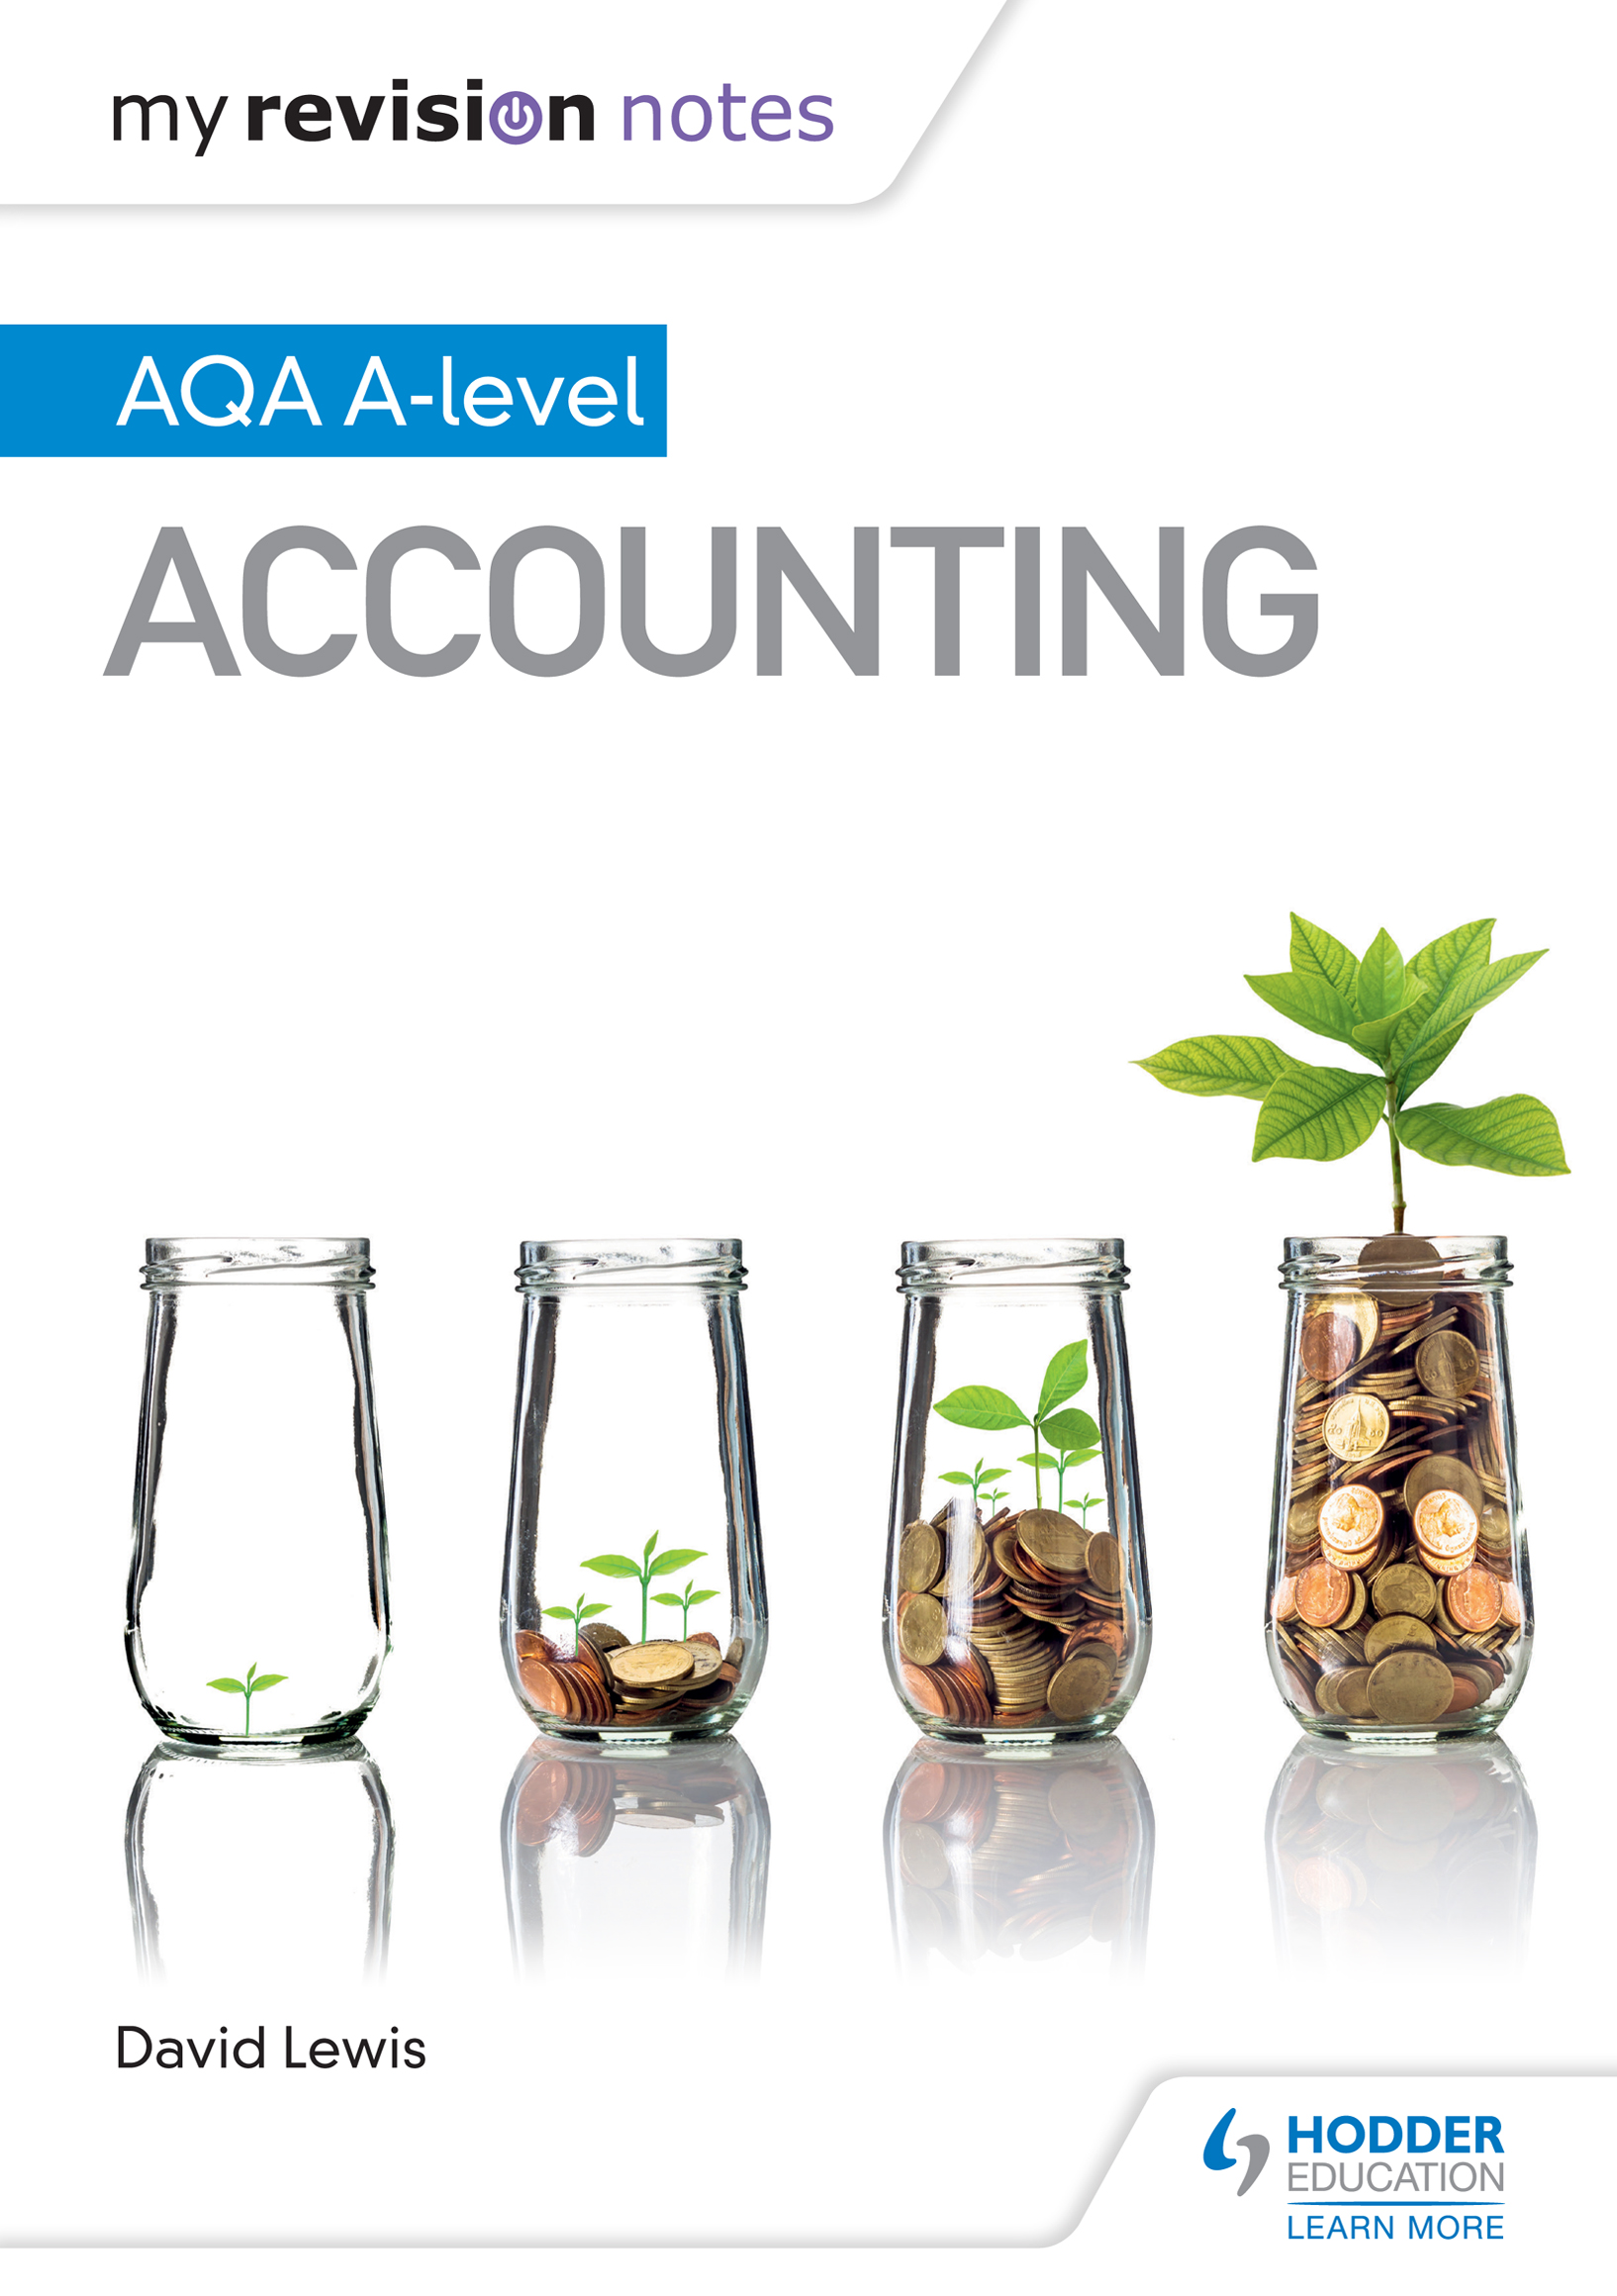 A level accounting notes pdf download mac 10.14 update download